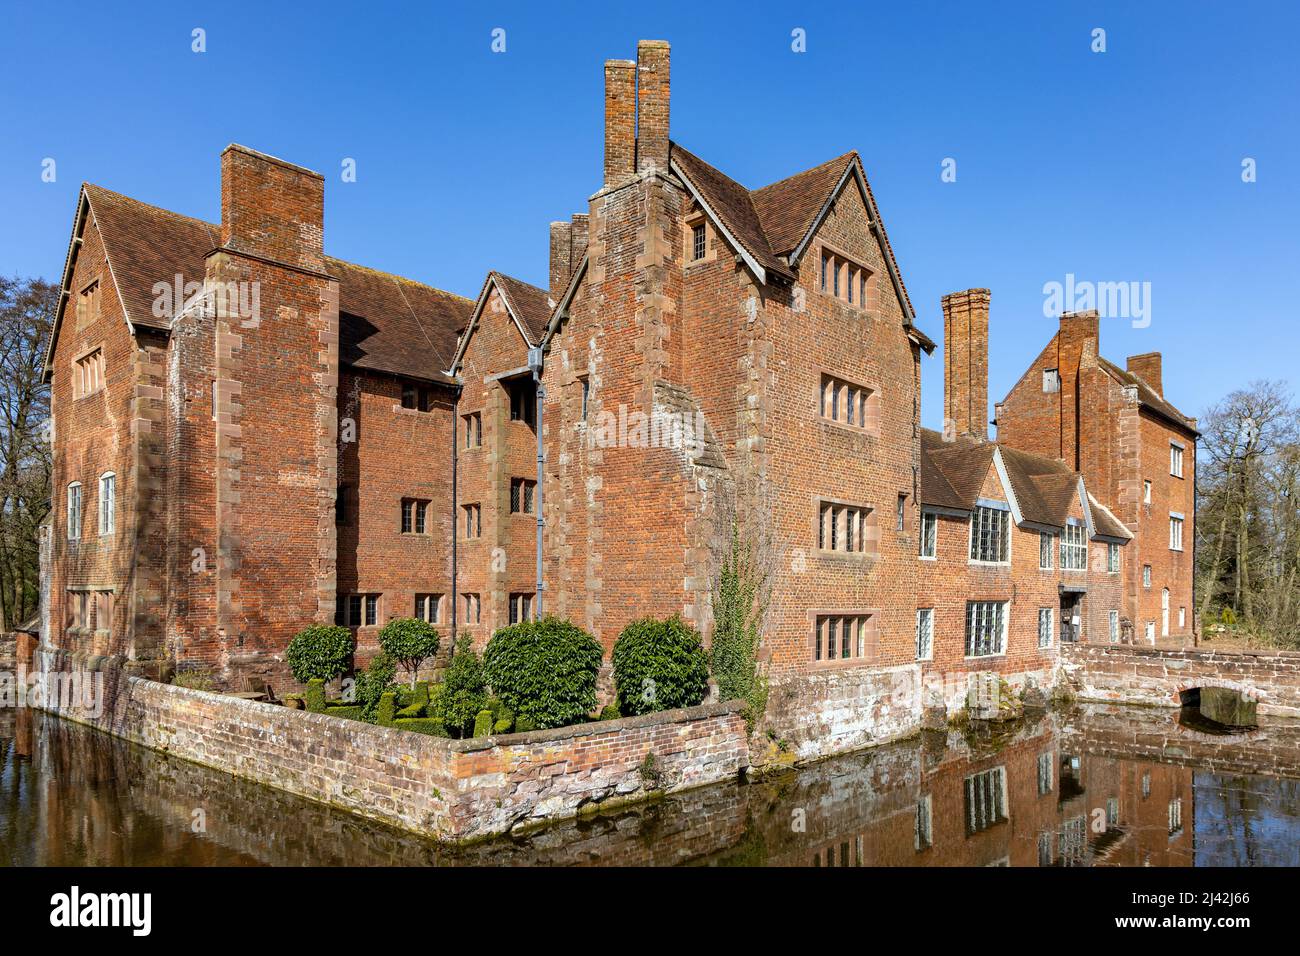 Harvington Hall, a 16th century moated medieval and Elizabethan manor house in the hamlet of Harvington, Worcestershire, England, UK Stock Photo